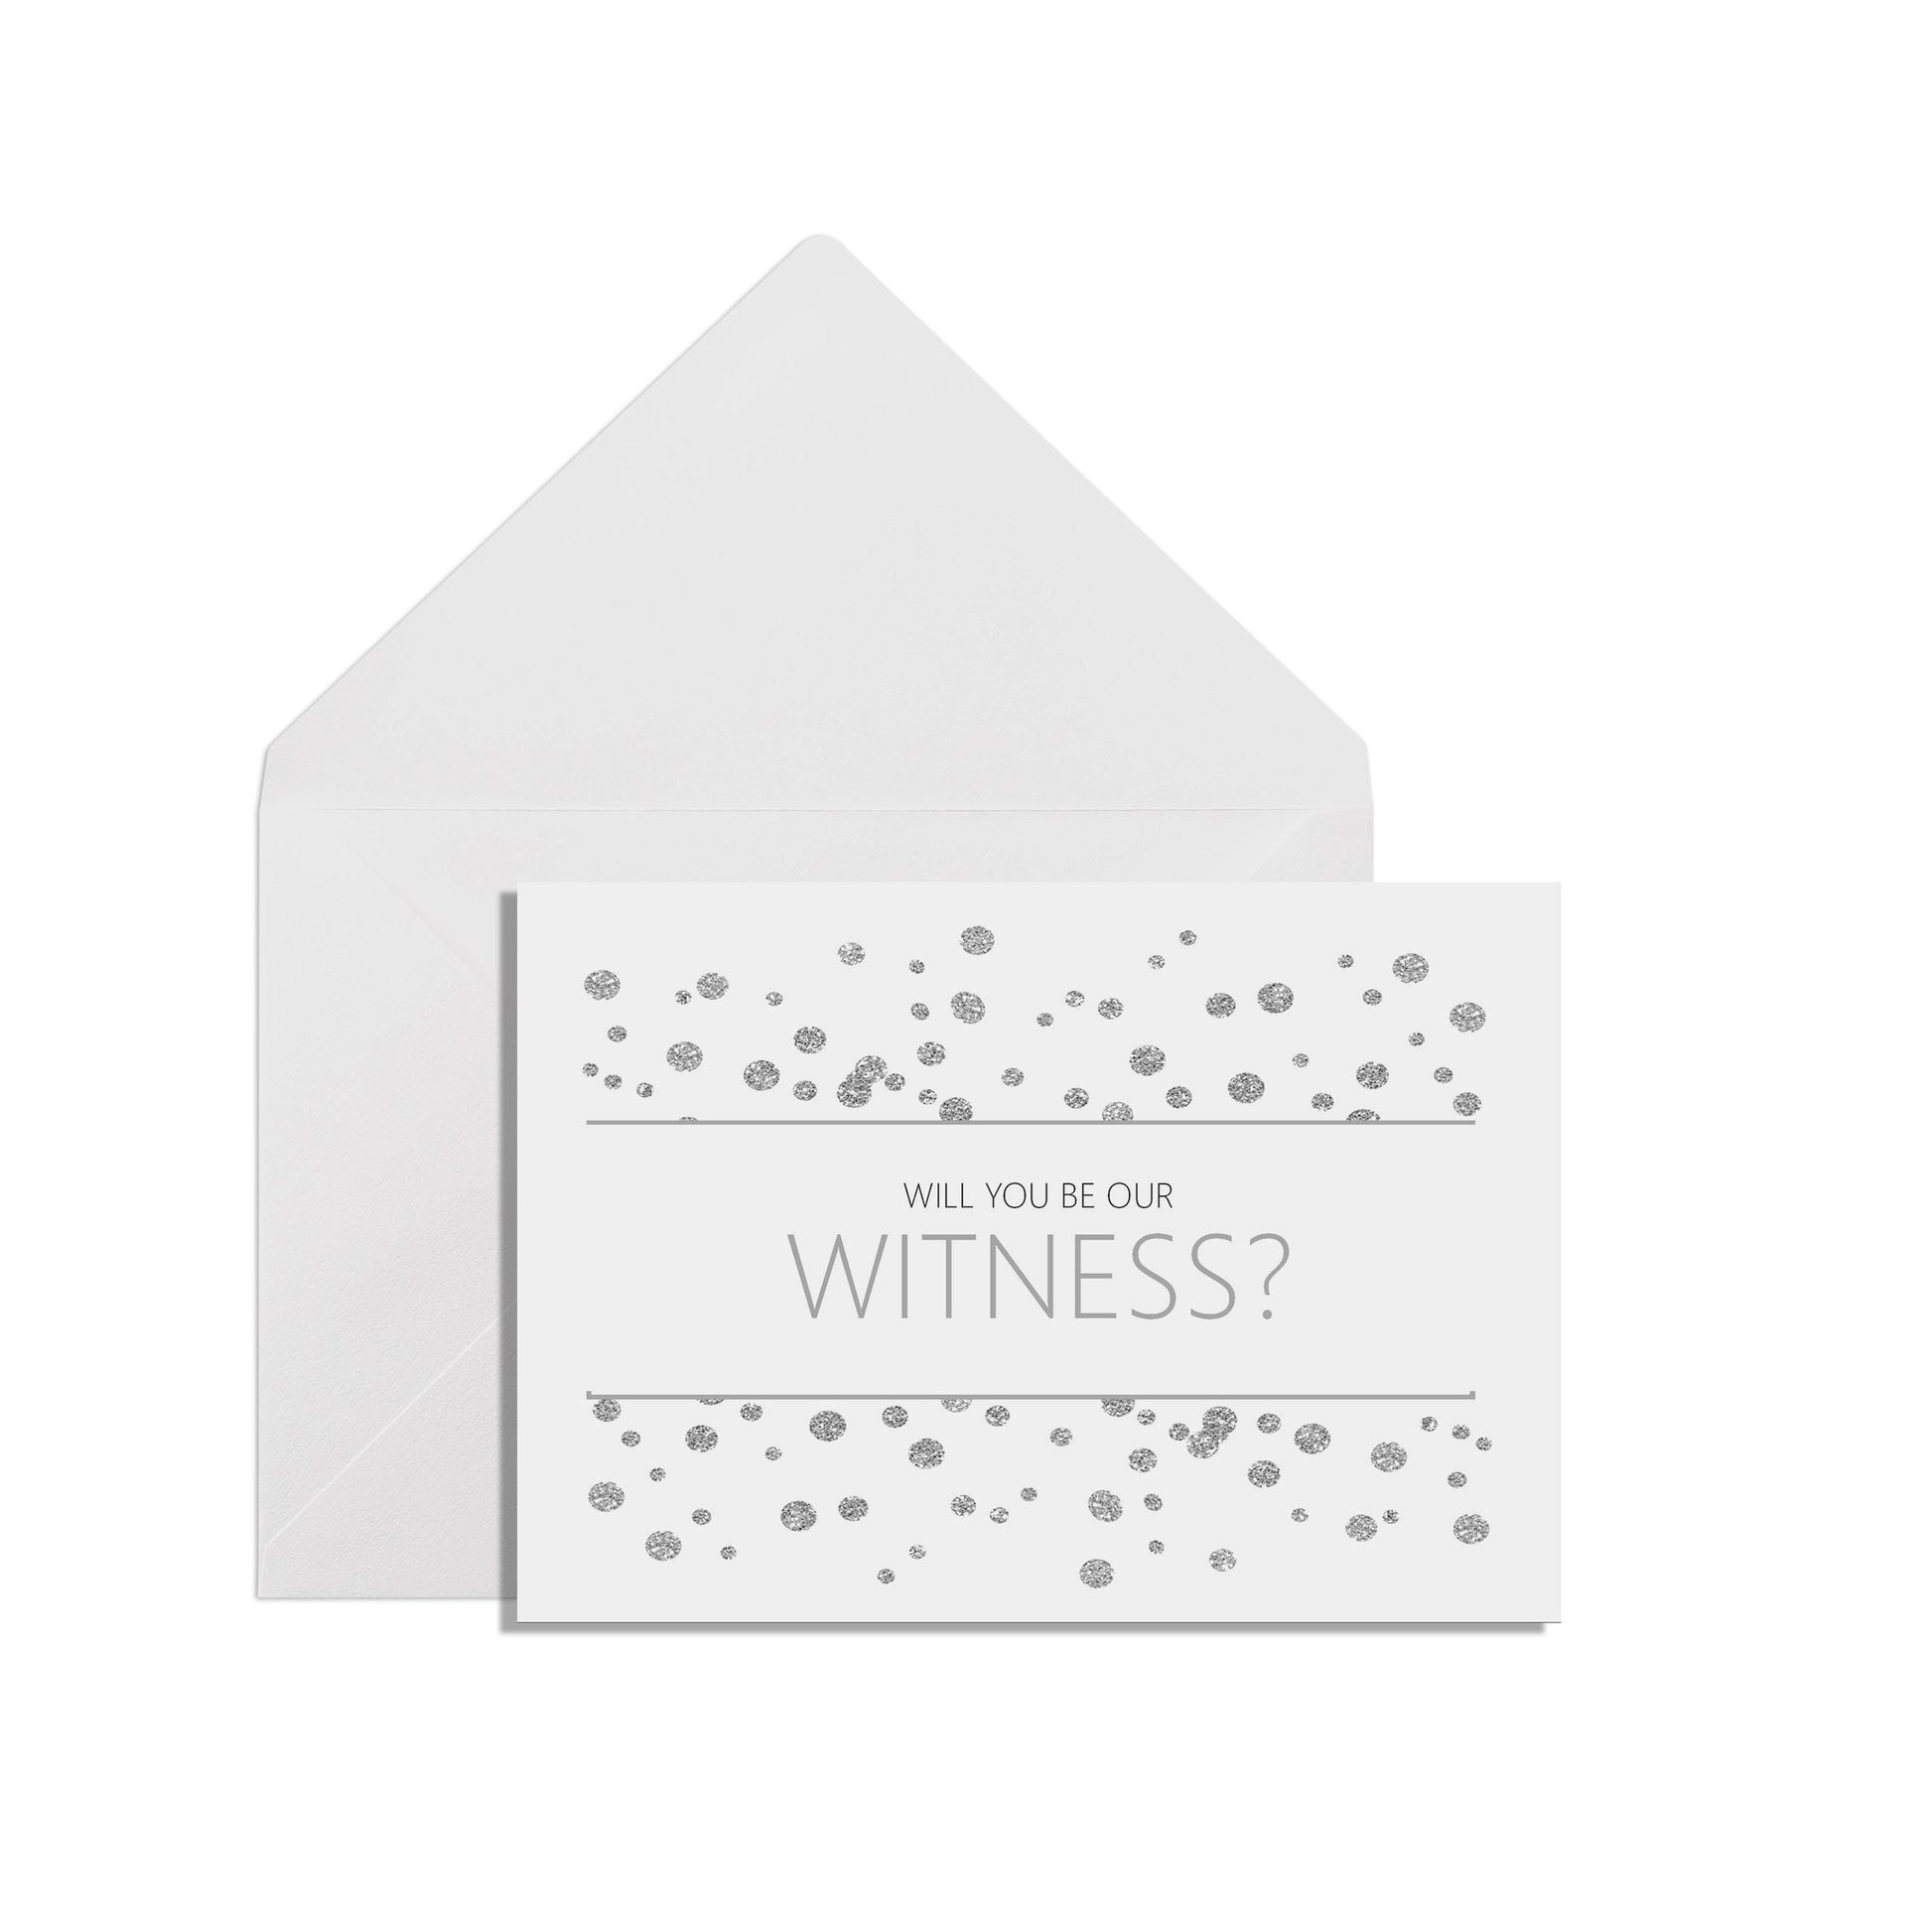 Will You Be Our Witness? Wedding Proposal Cards A6 Silver Effect With White Envelope